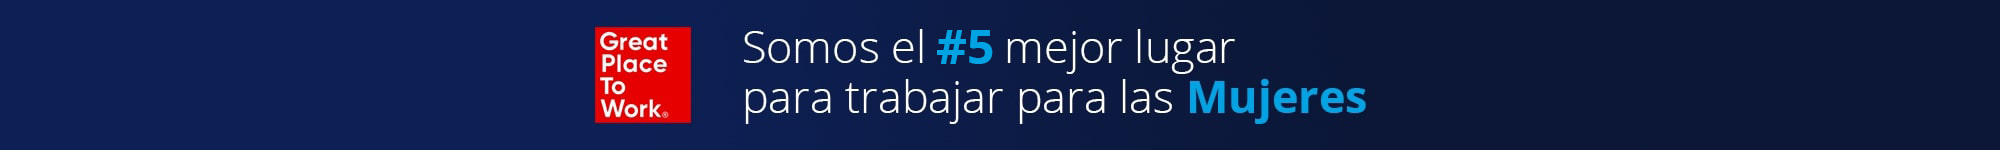 BannerGreatPlaceMujeres